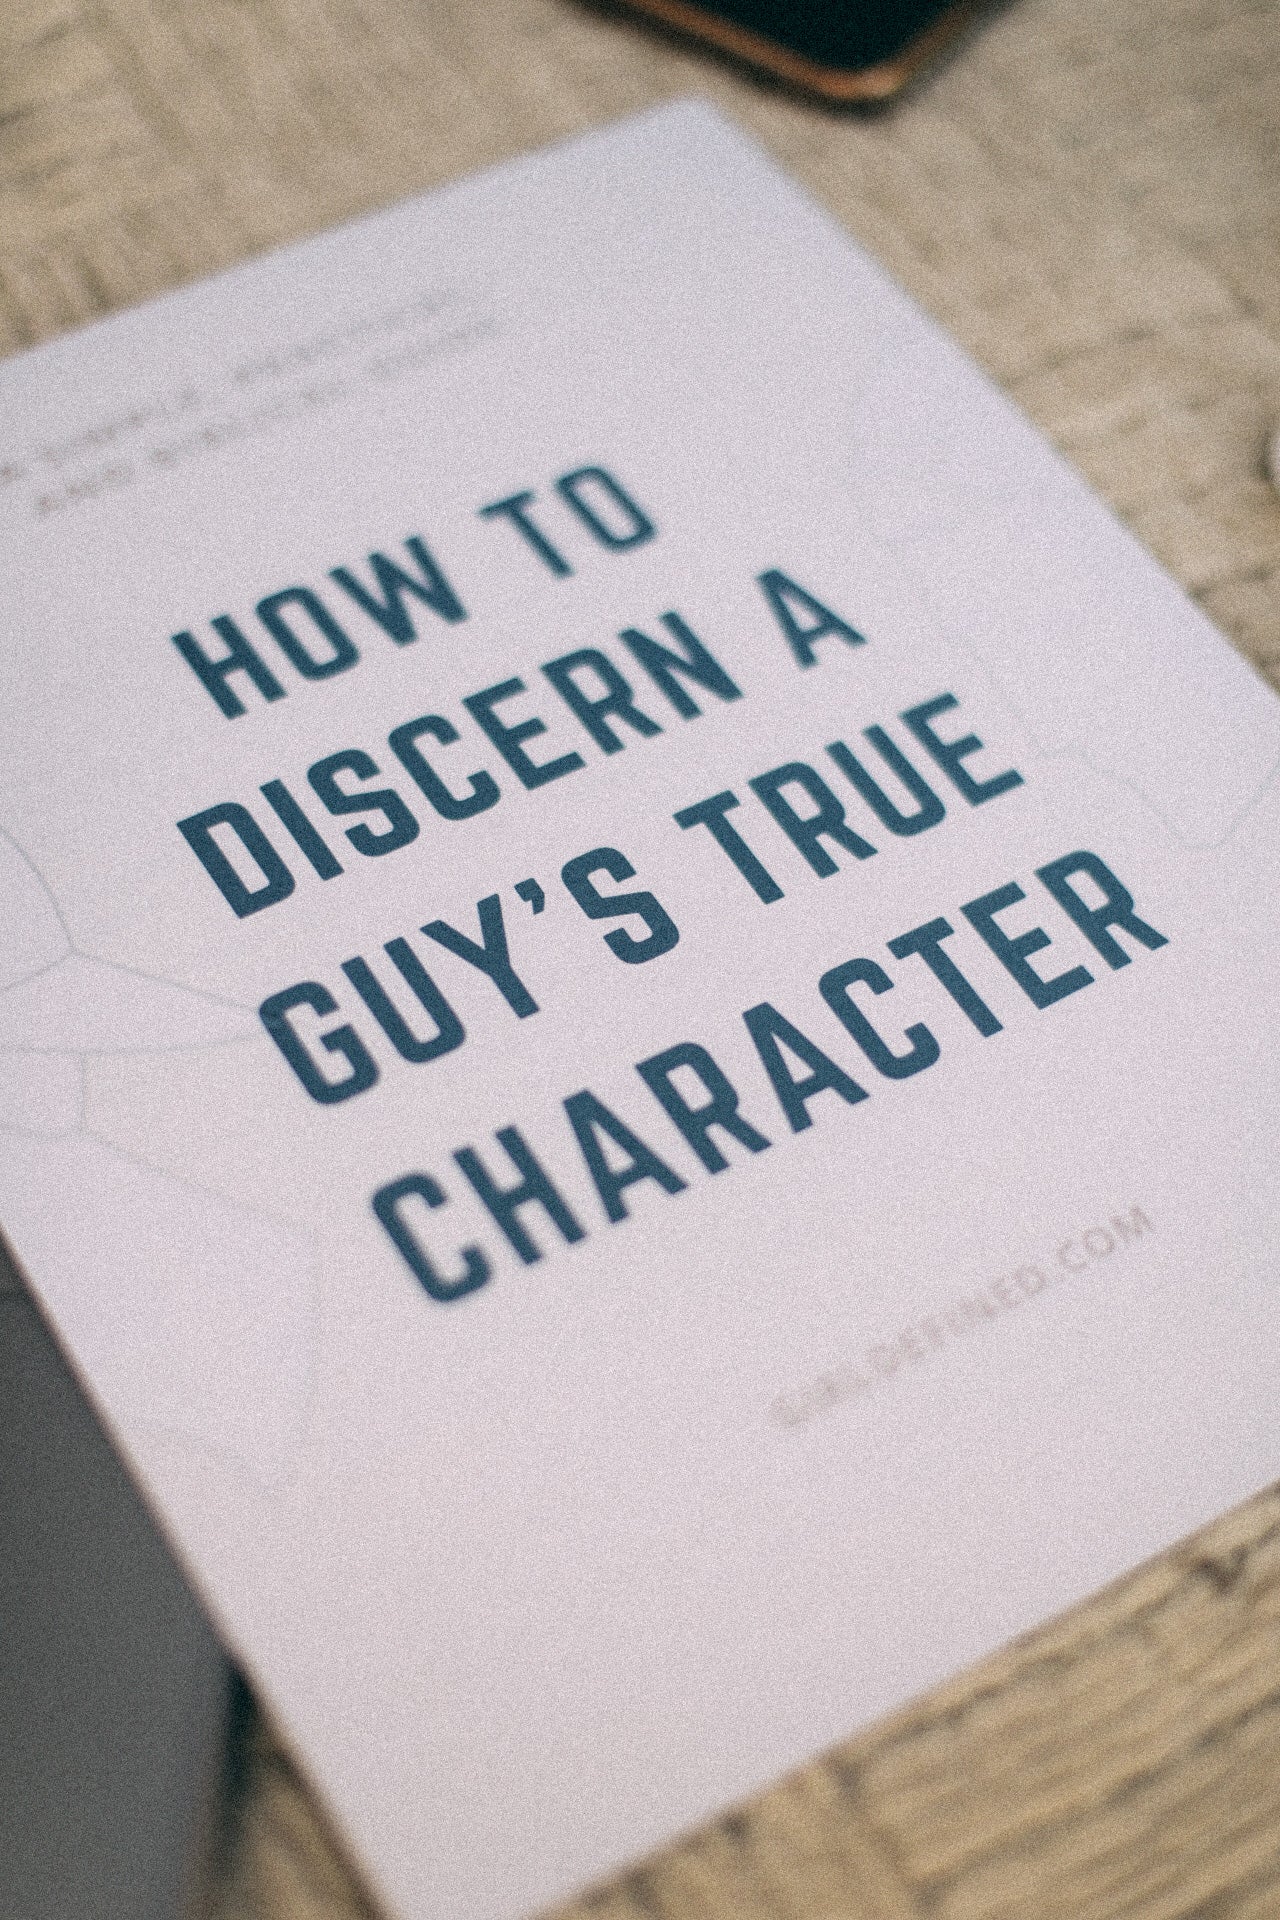 How to Discern a Guy's True Character (PDF Download)